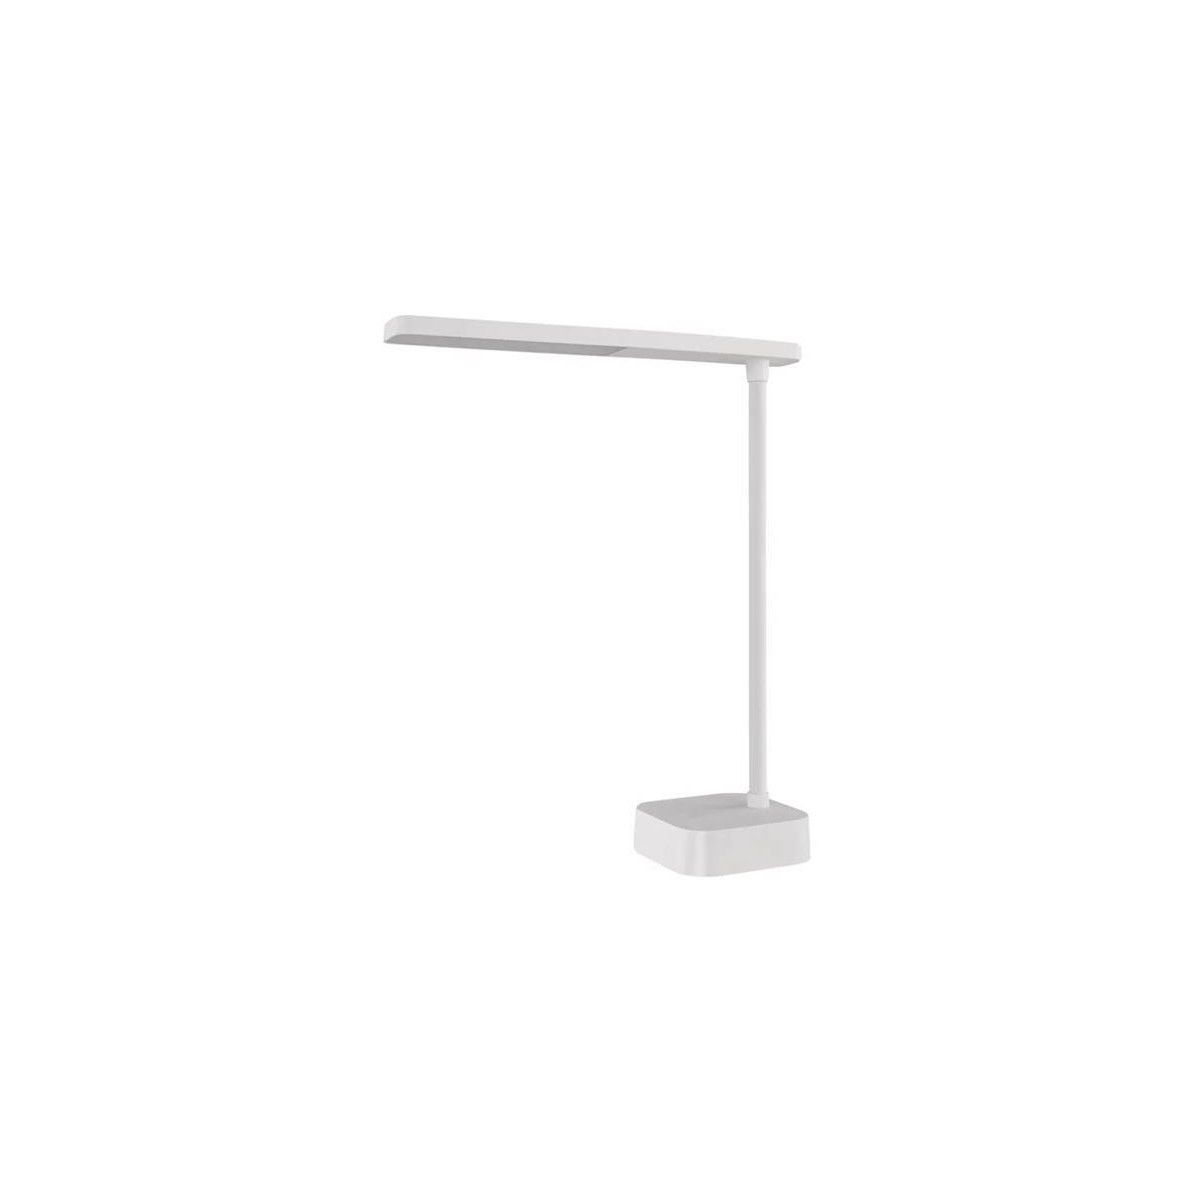 More about Lampa stolní EMOS Z7626 LUCY